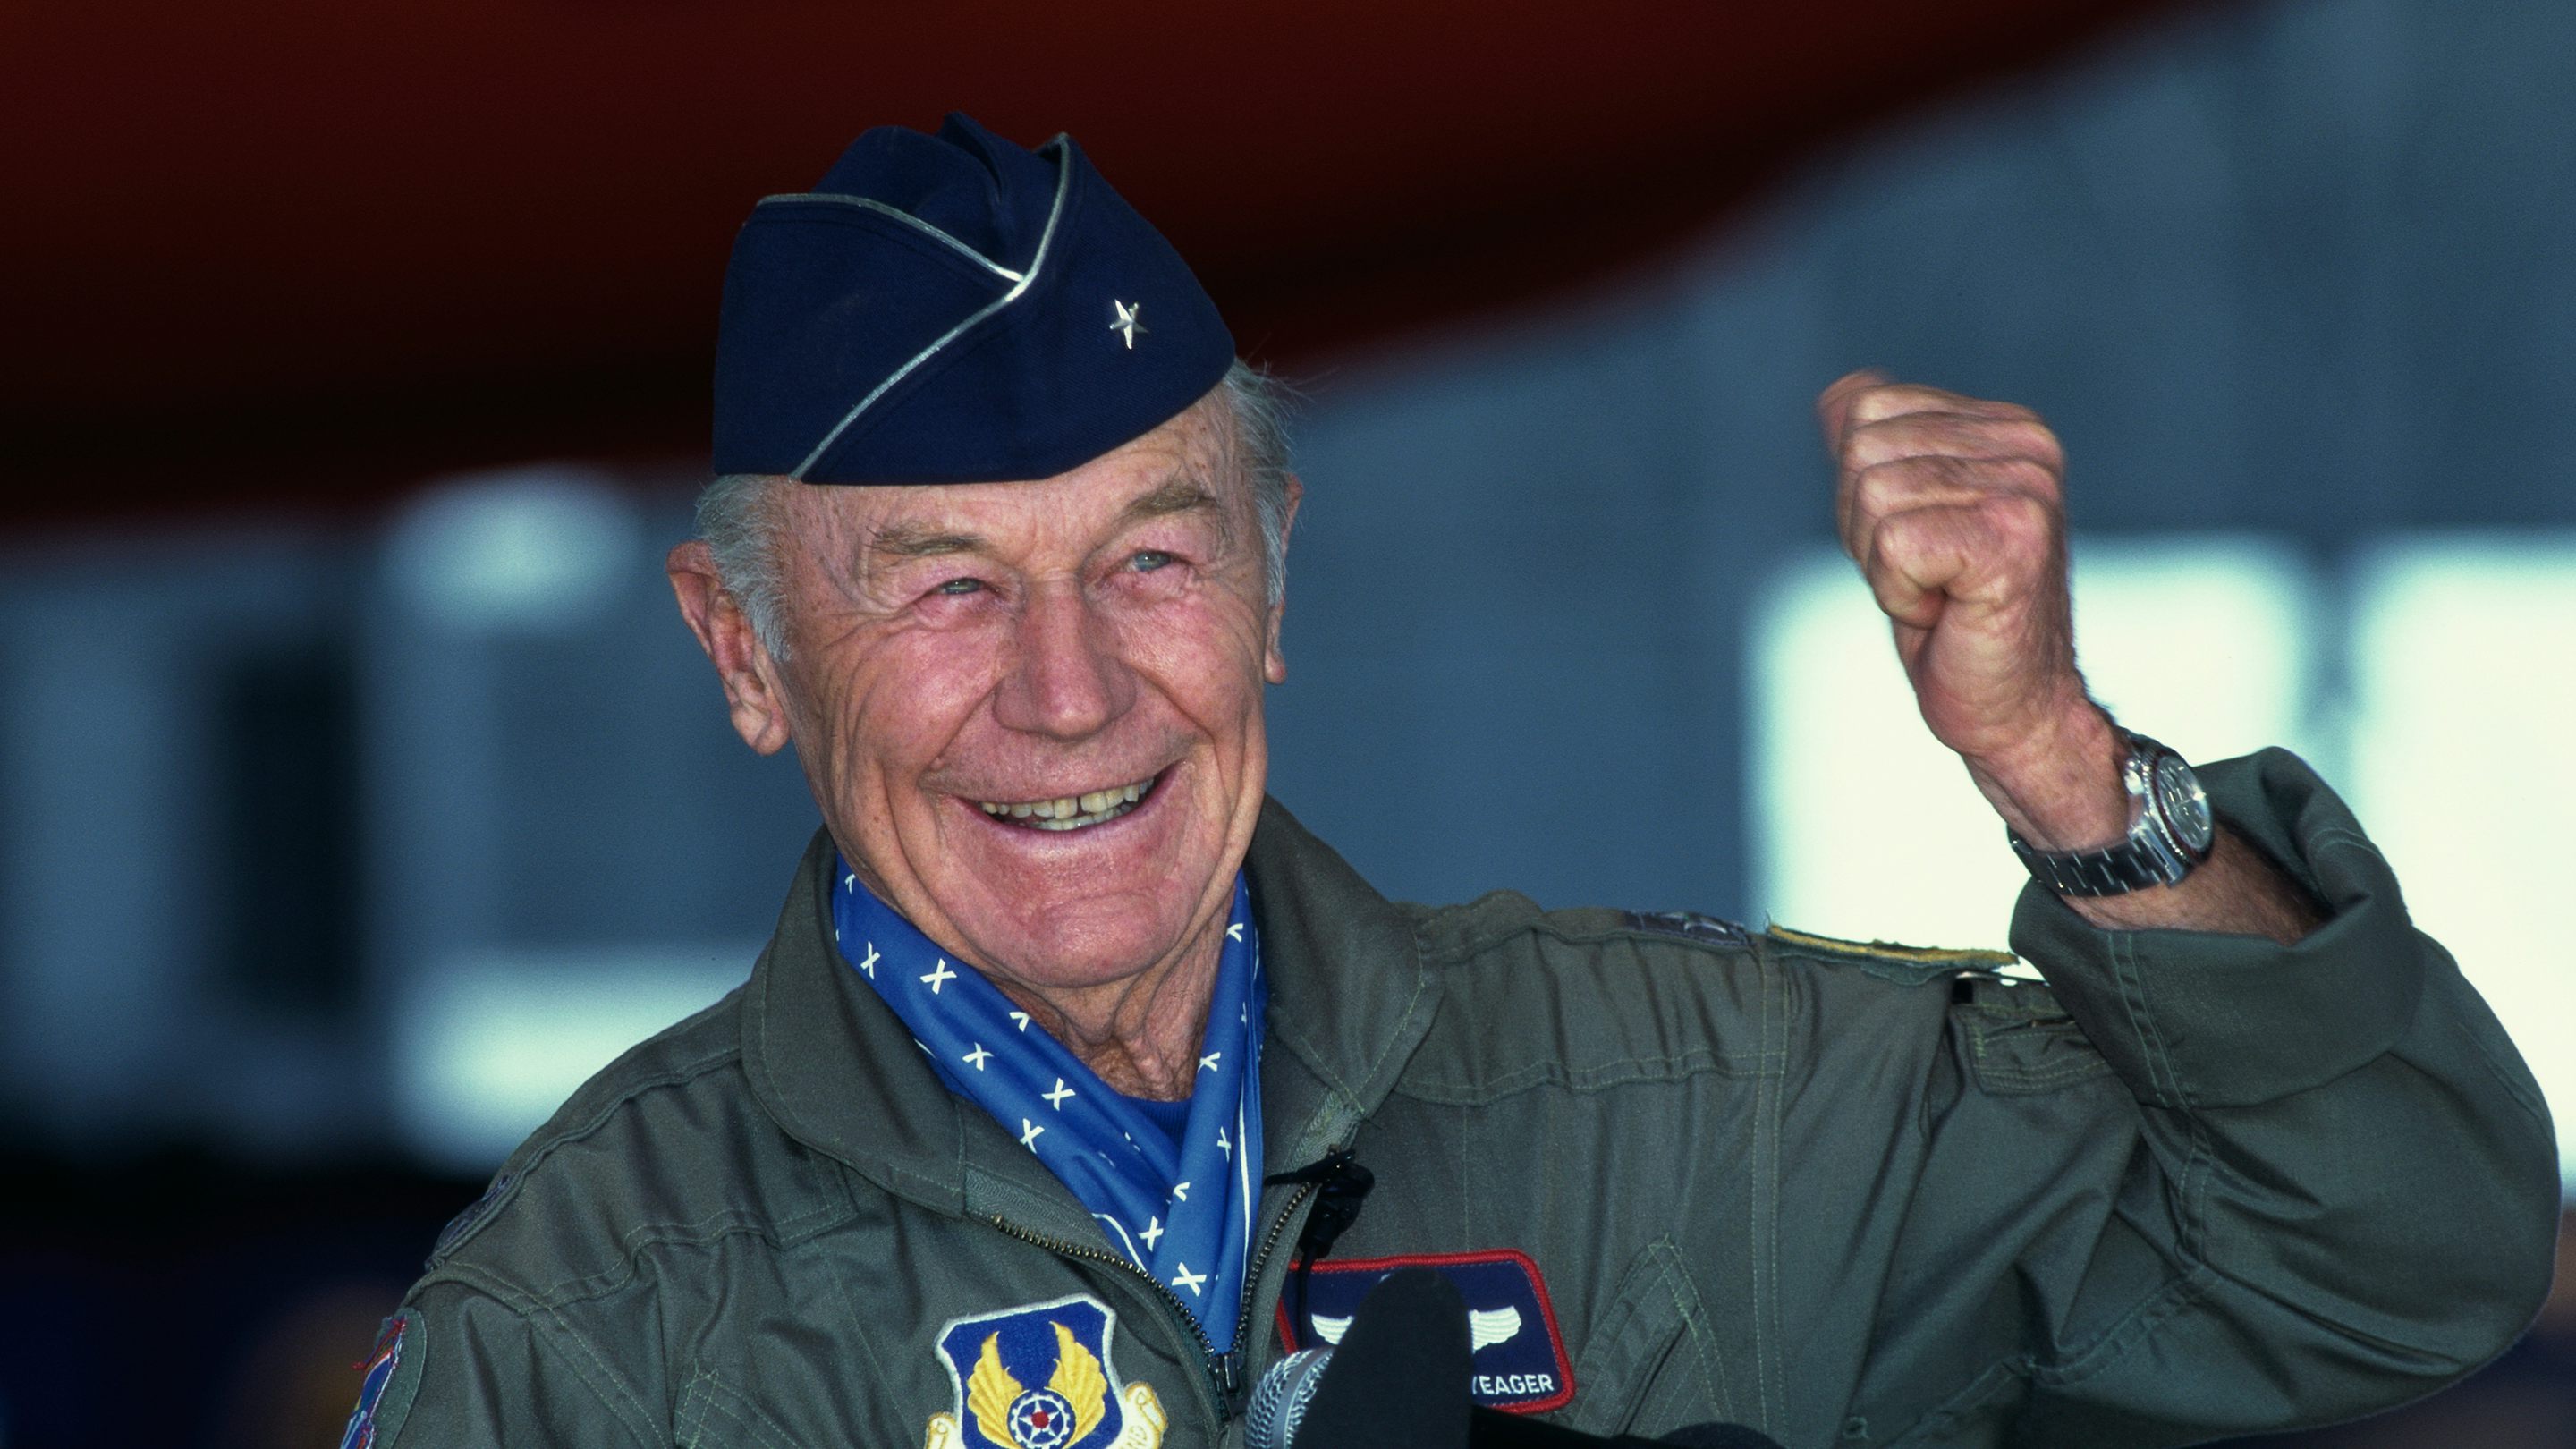 boliger Seraph tab Culture Of Time: R.I.P. Chuck Yeager, The Man Who Broke The Sound Barrier -  Hodinkee